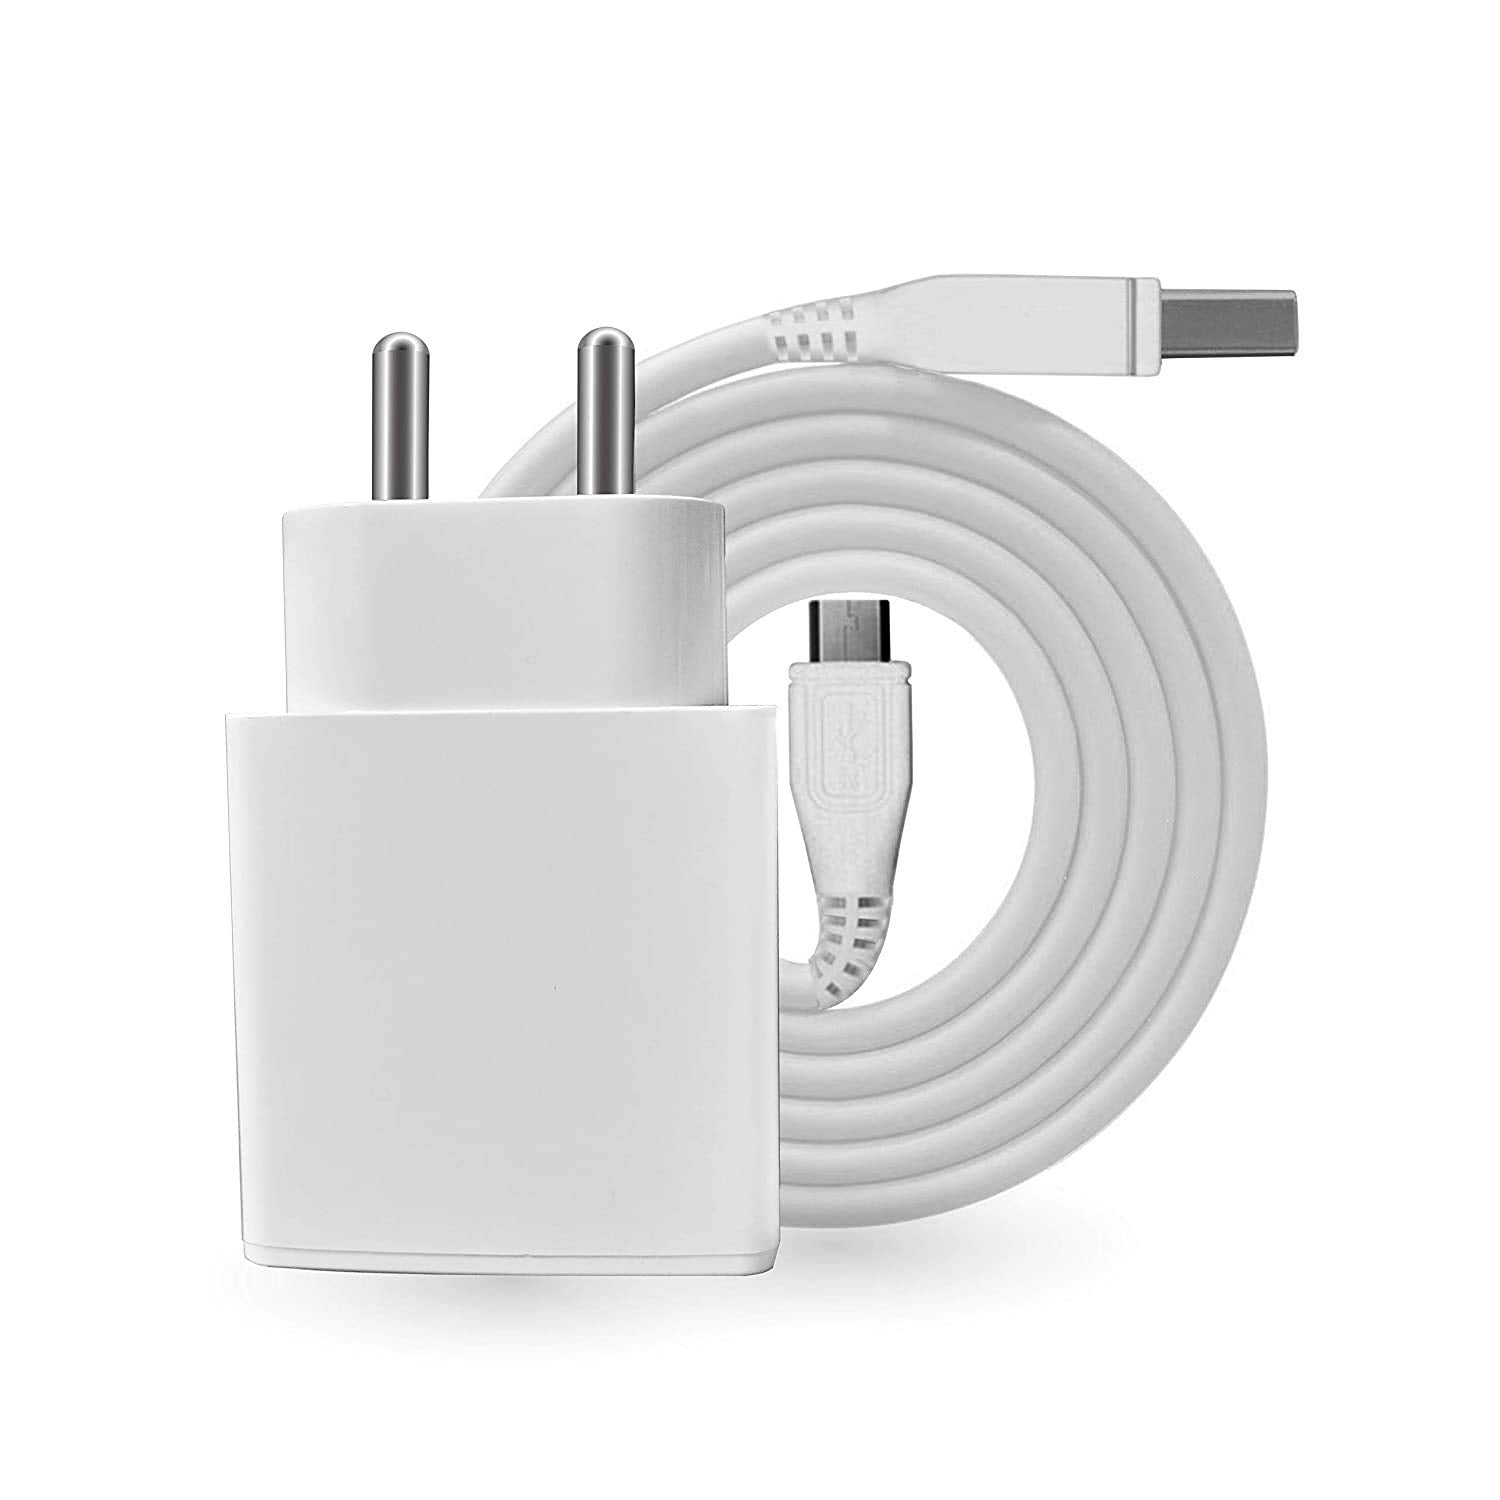 VIVO Y55L 2 Amp Fast Mobile Charger with Cable